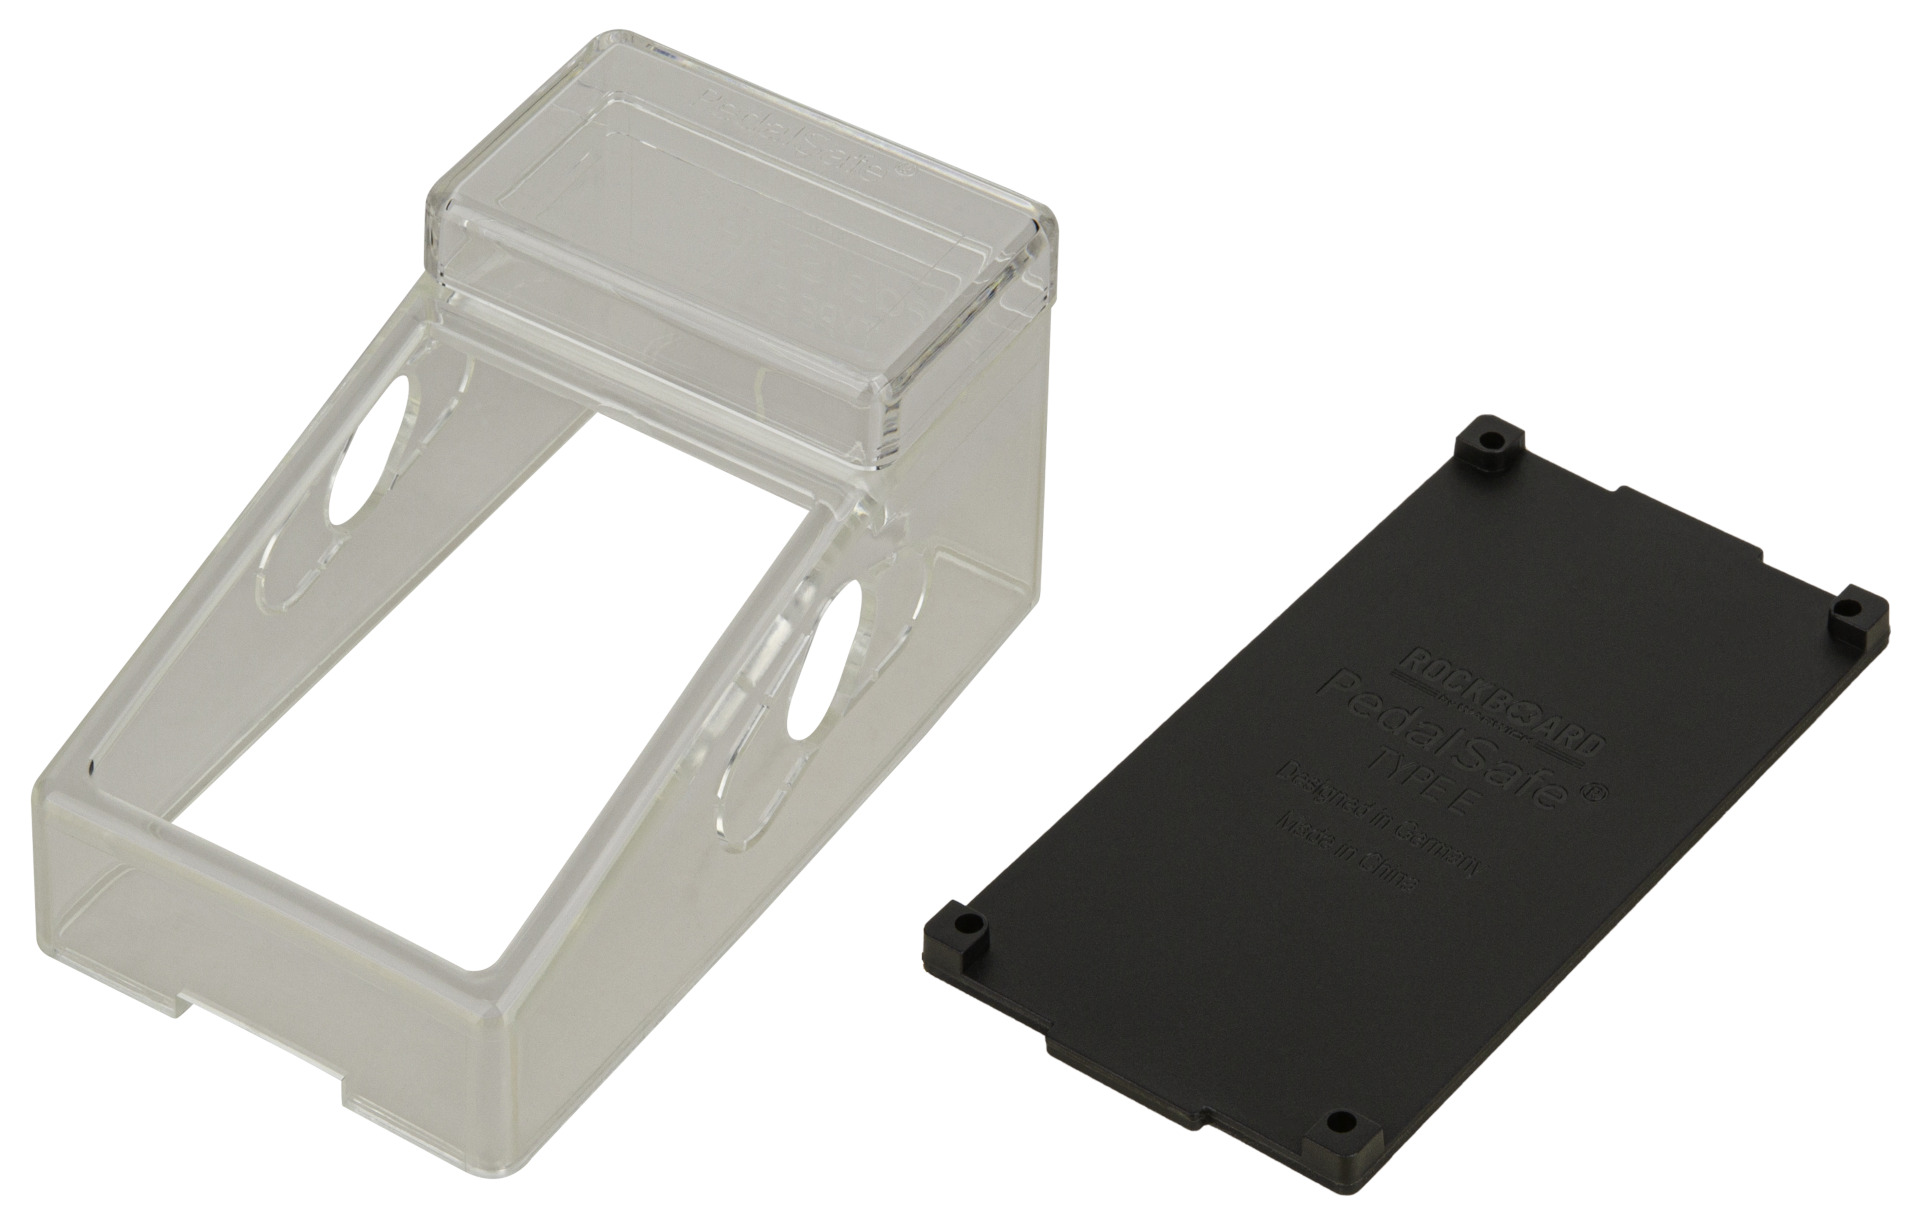 RockBoard PedalSafe Type E - Protective Cover And Universal Mounting Plate For Standard Boss Pedals